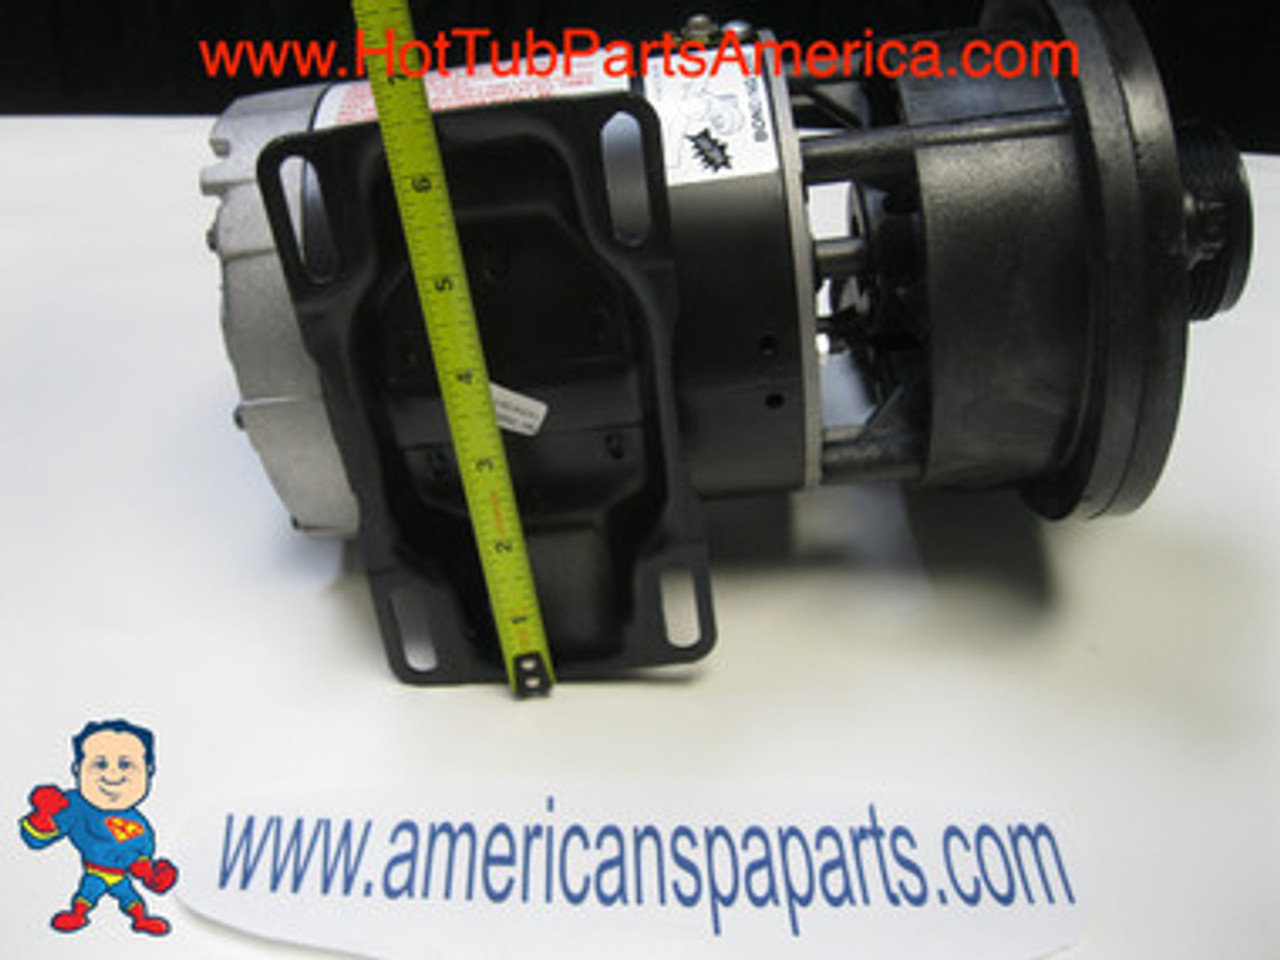 Pump, Circ., WW Iron Might, 1/8hp, 0.63A, 230v, 48frame, 1 1/2"
Which measures about 2 3/8" across the threads.